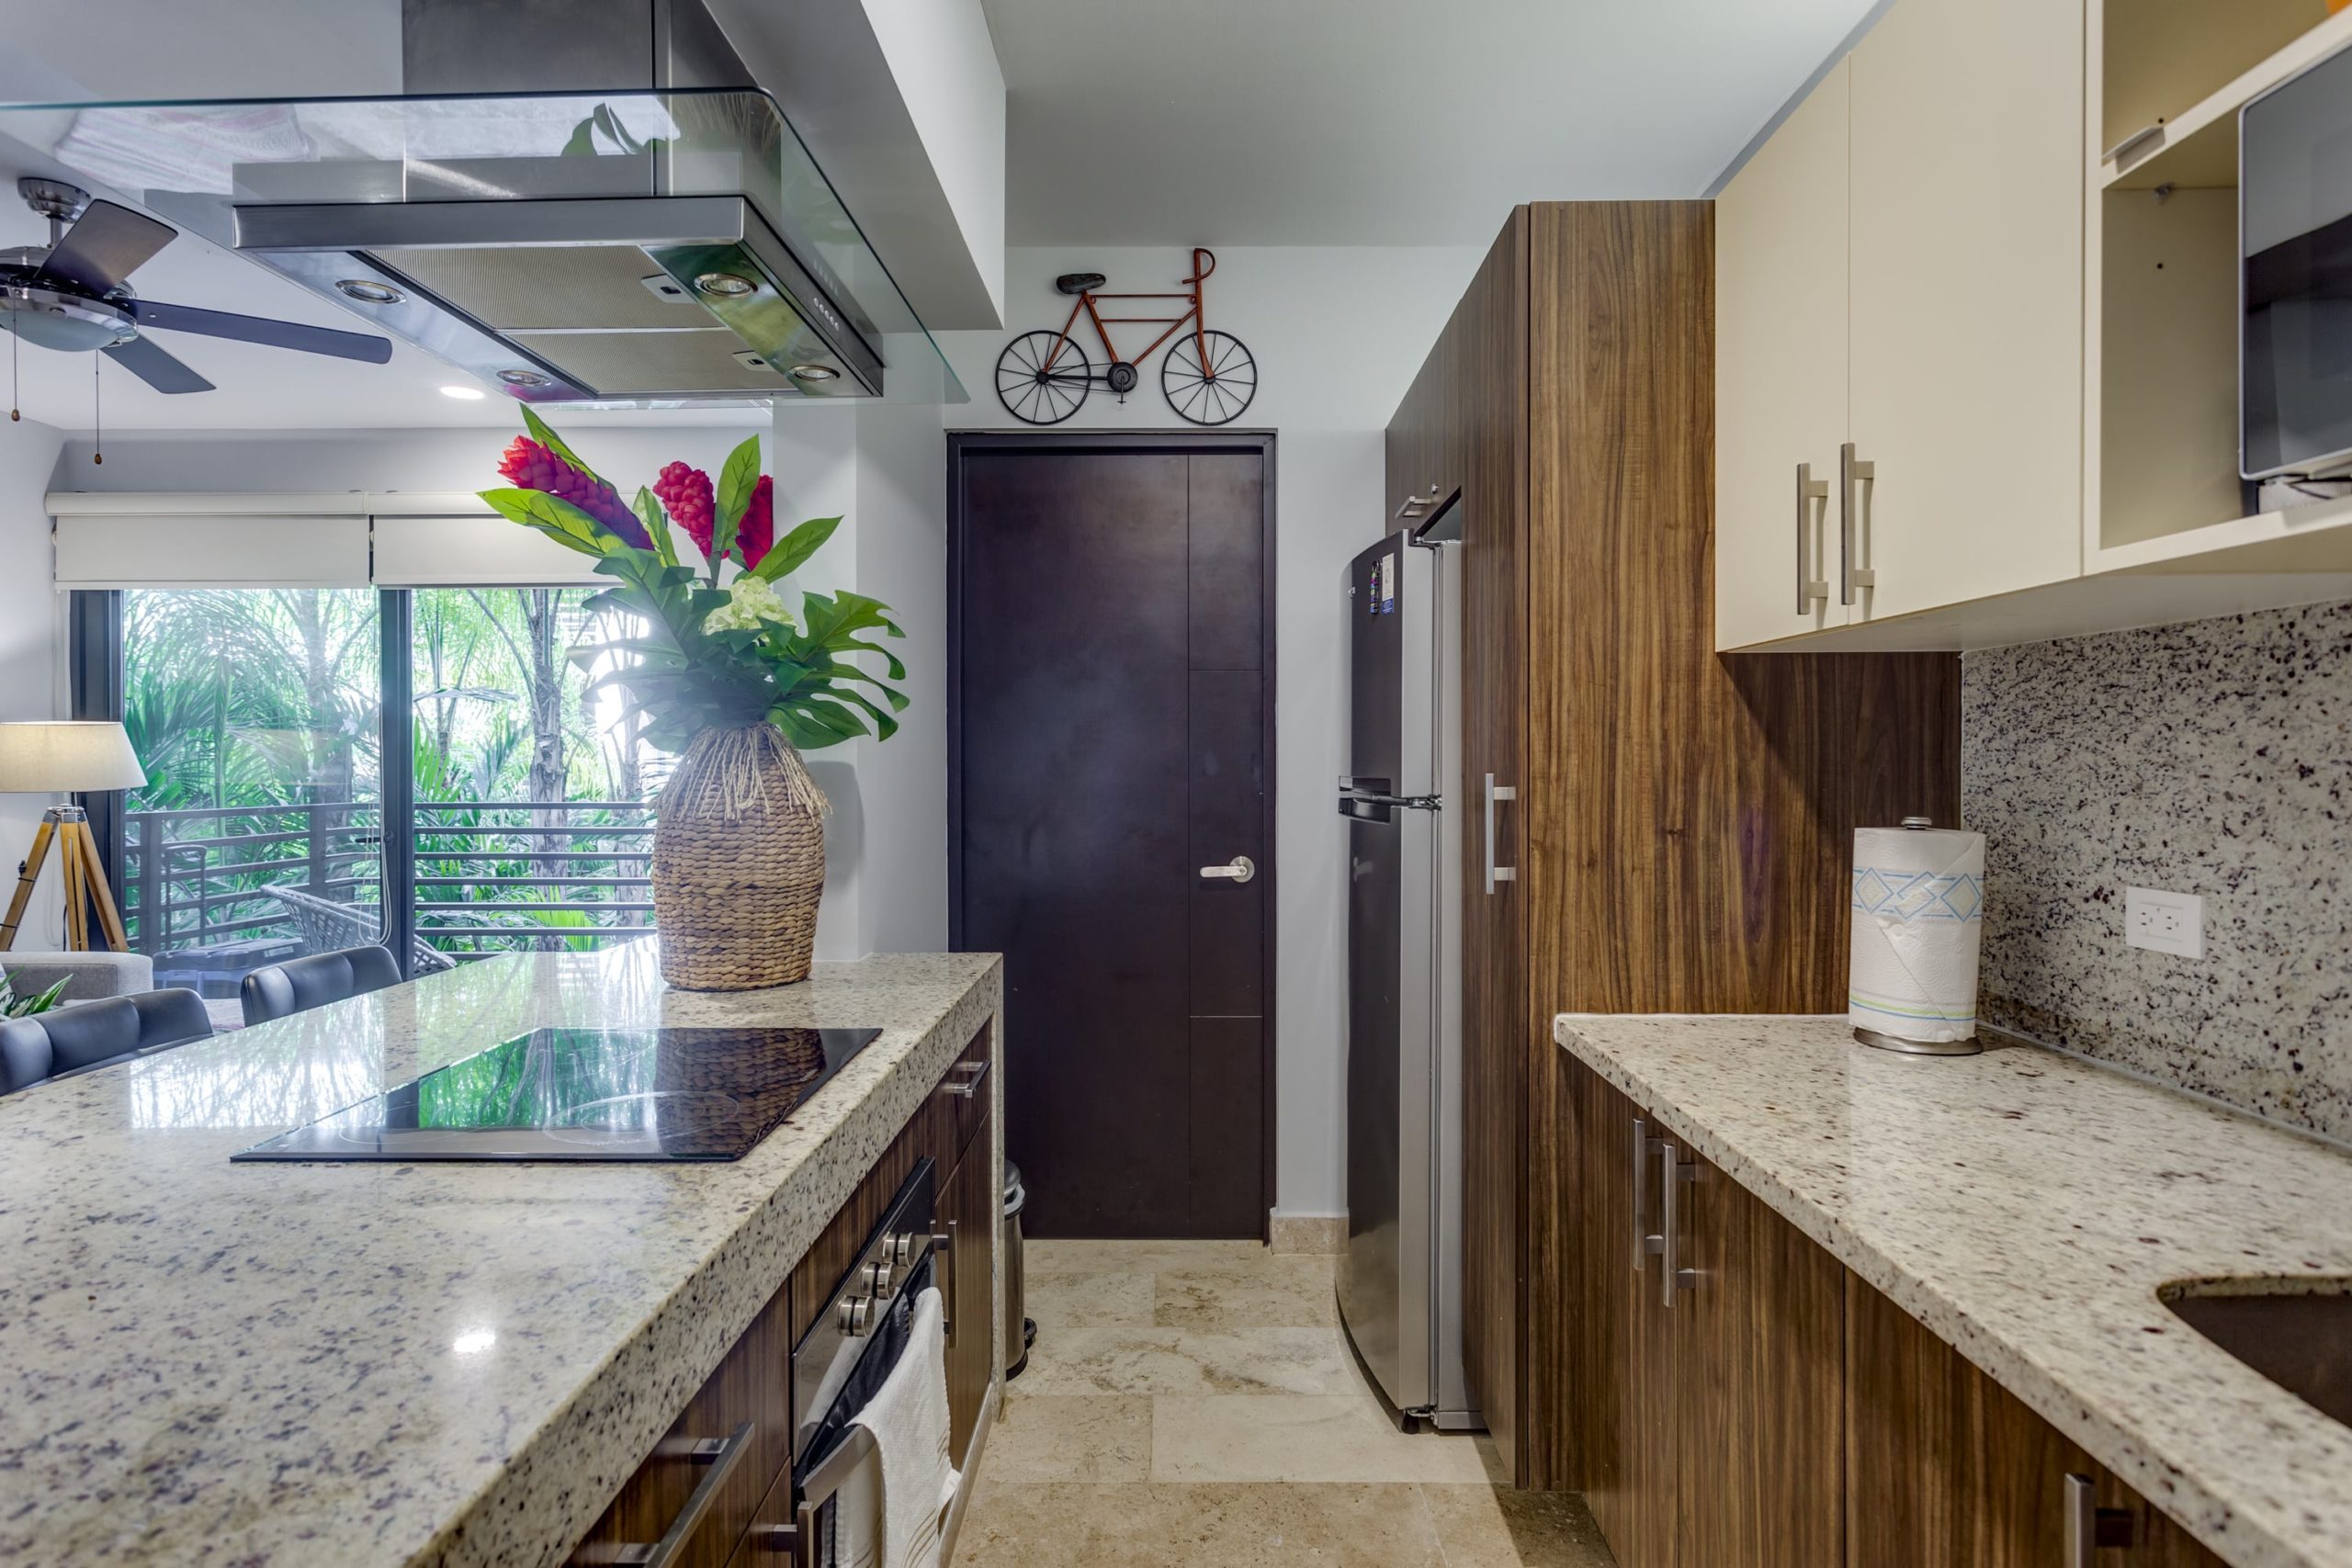 g playa del carmen condos arenis equipped kitchen